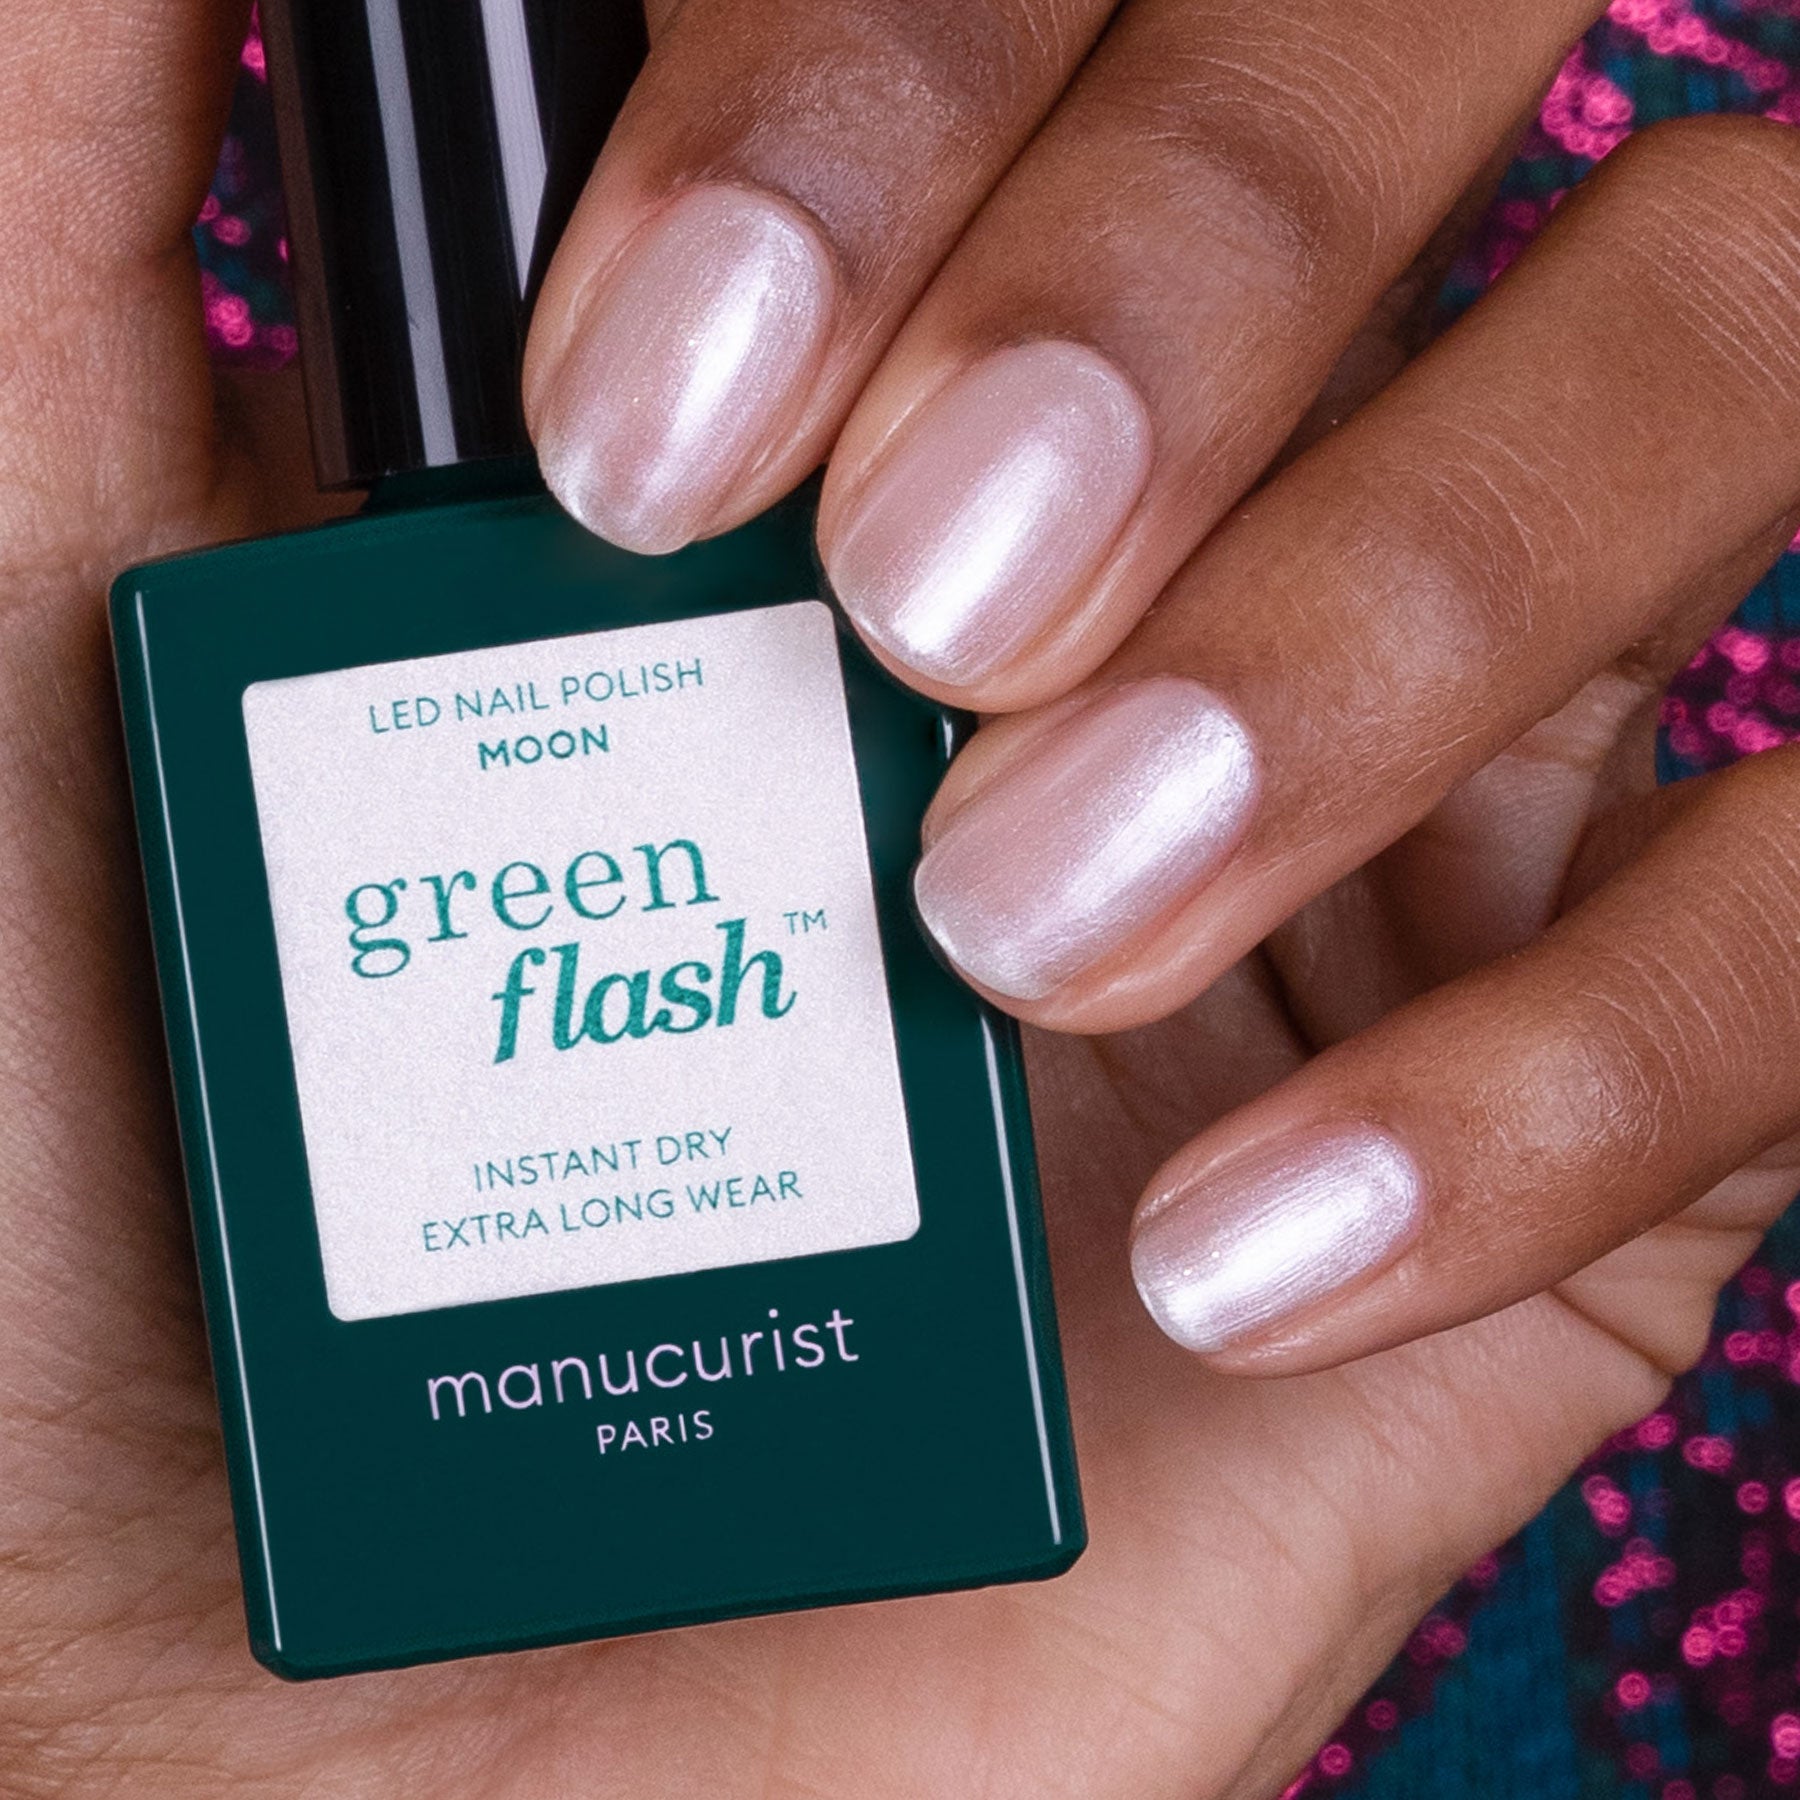 MANUCURIST Green Nail Lacquer Red Cherry » buy online